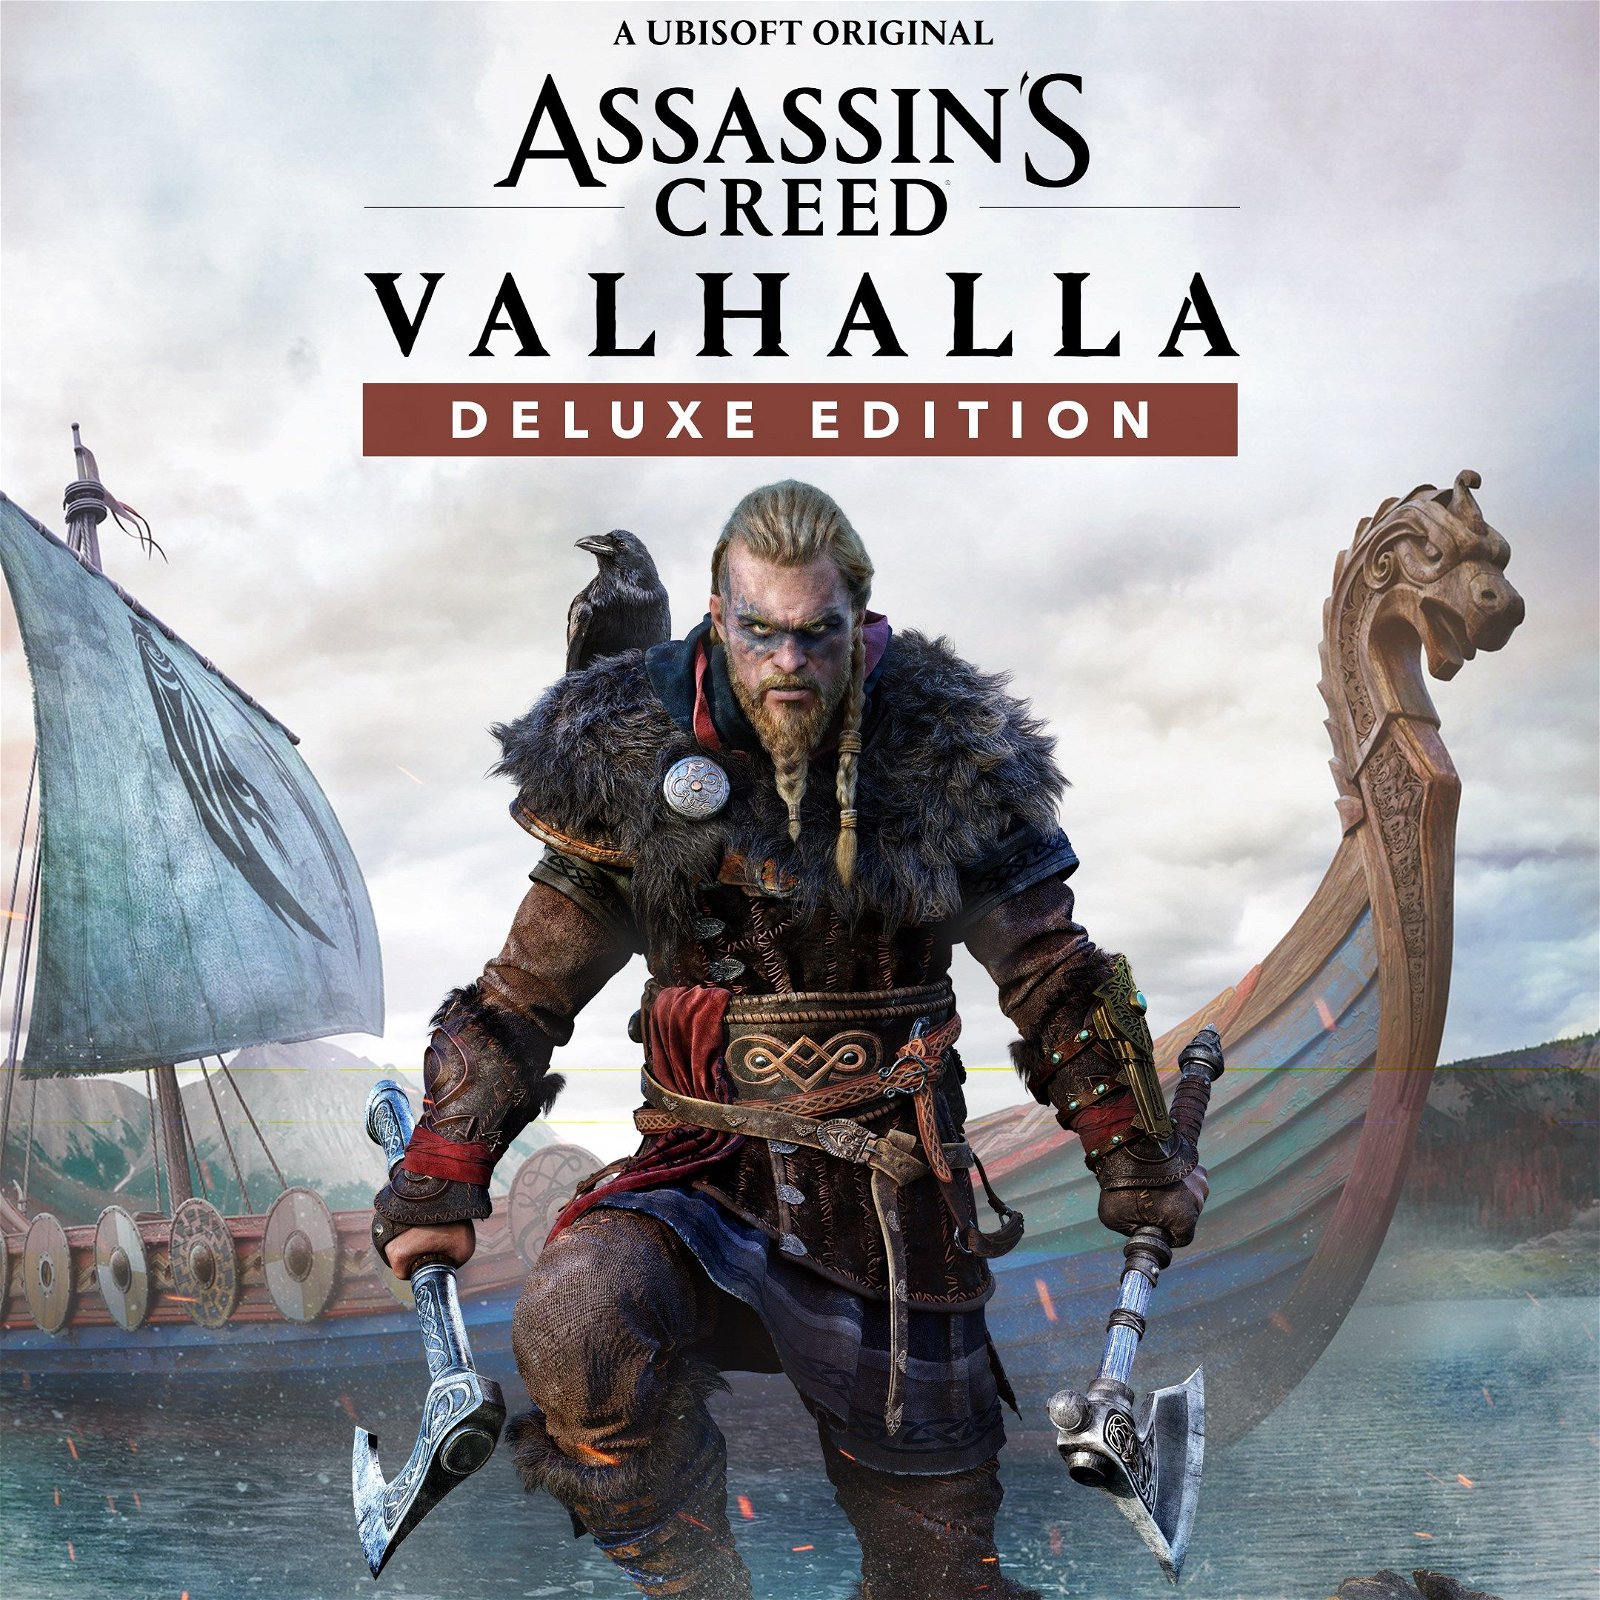 Image of Assassin's Creed Valhalla Deluxe Edition